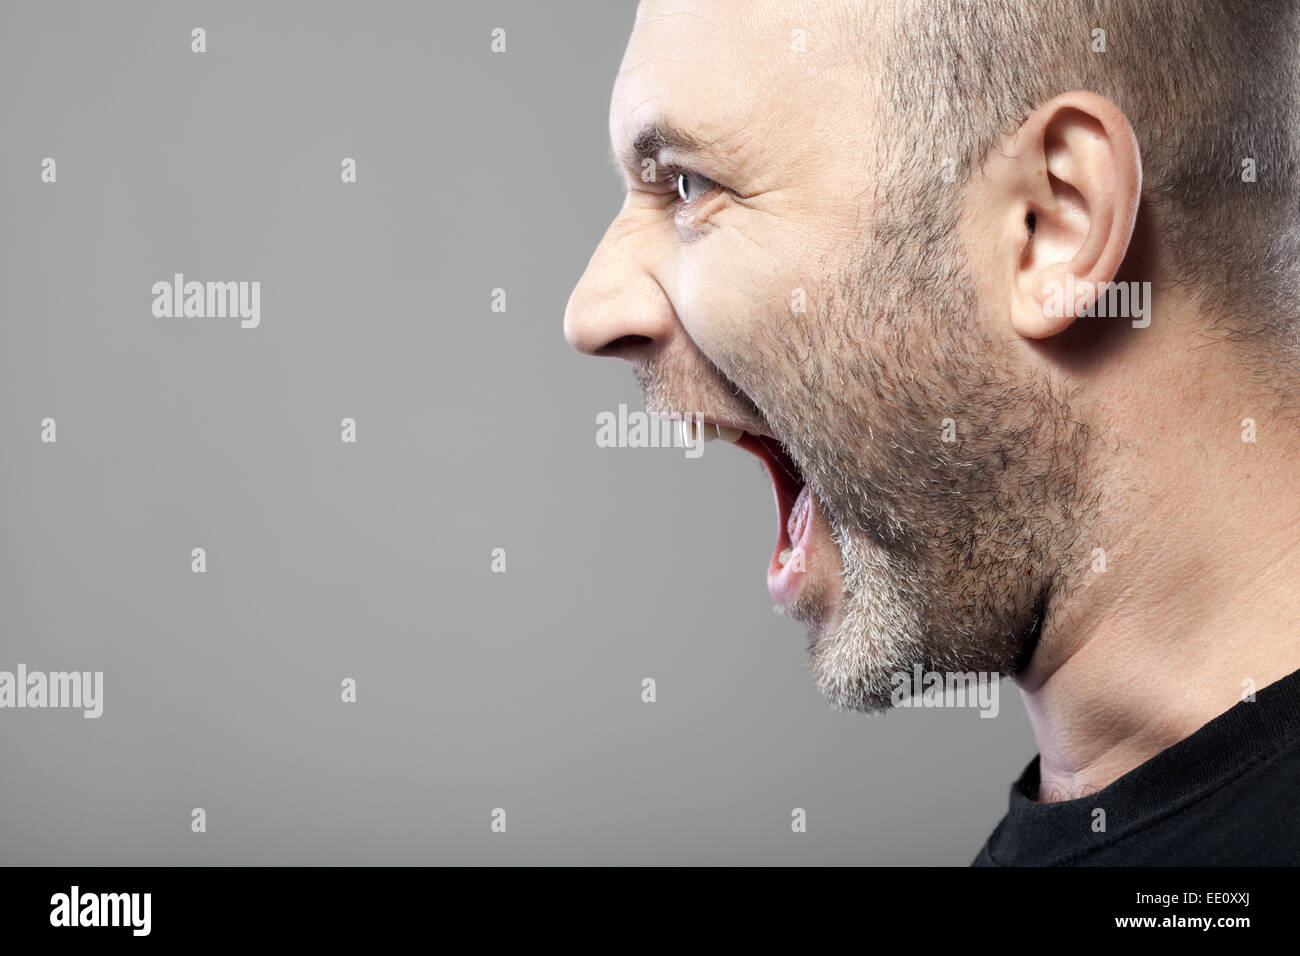 portrait of angry man sreaming isolated on gray background with copyspace Stock Photo